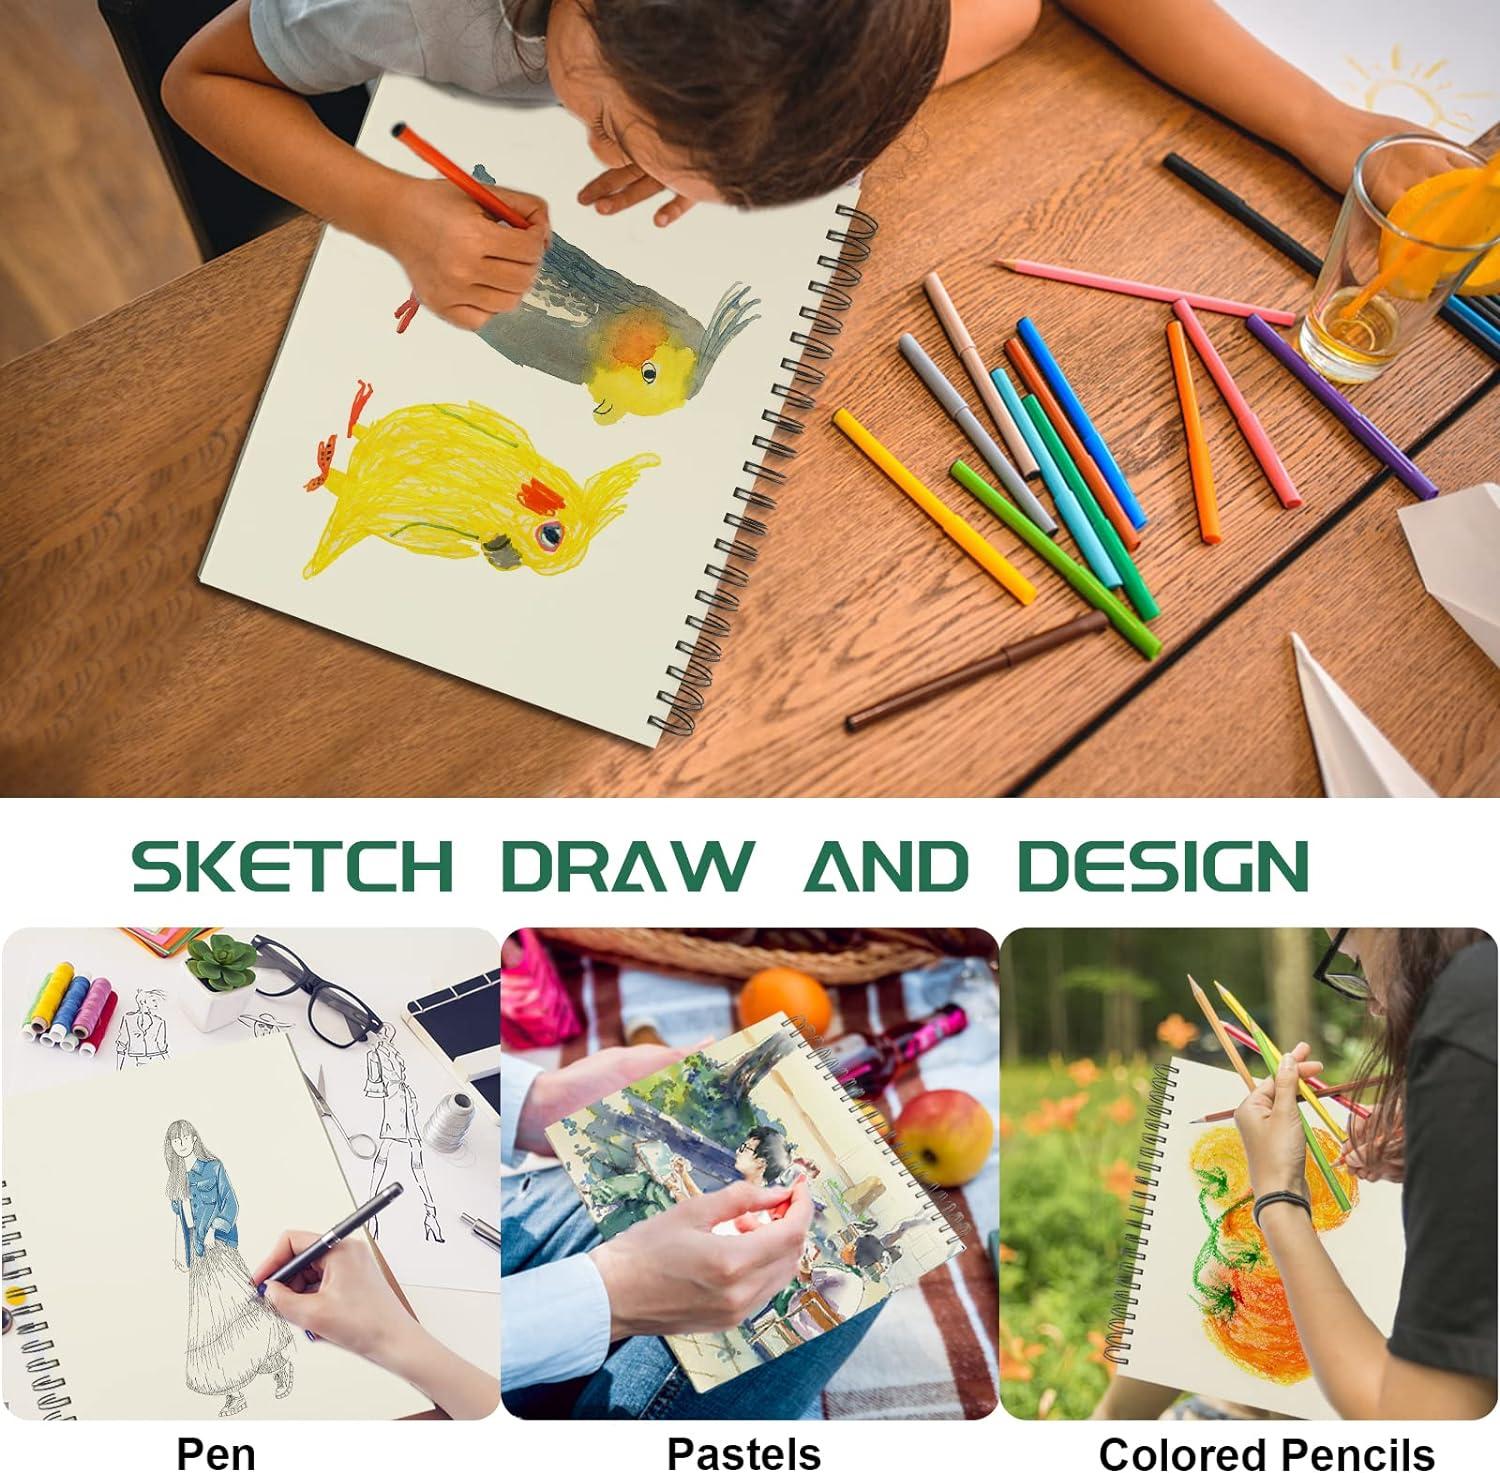 Sketch Book 5.5x8.5 - Small Sketchbook for Drawing - Spiral Bound Art  Sketch Pad Pack of 2 200 Sheets (68 lb/100gsm) Acid-Free Drawing Paper for  Artists Kids Teens & Adults 5.5 x